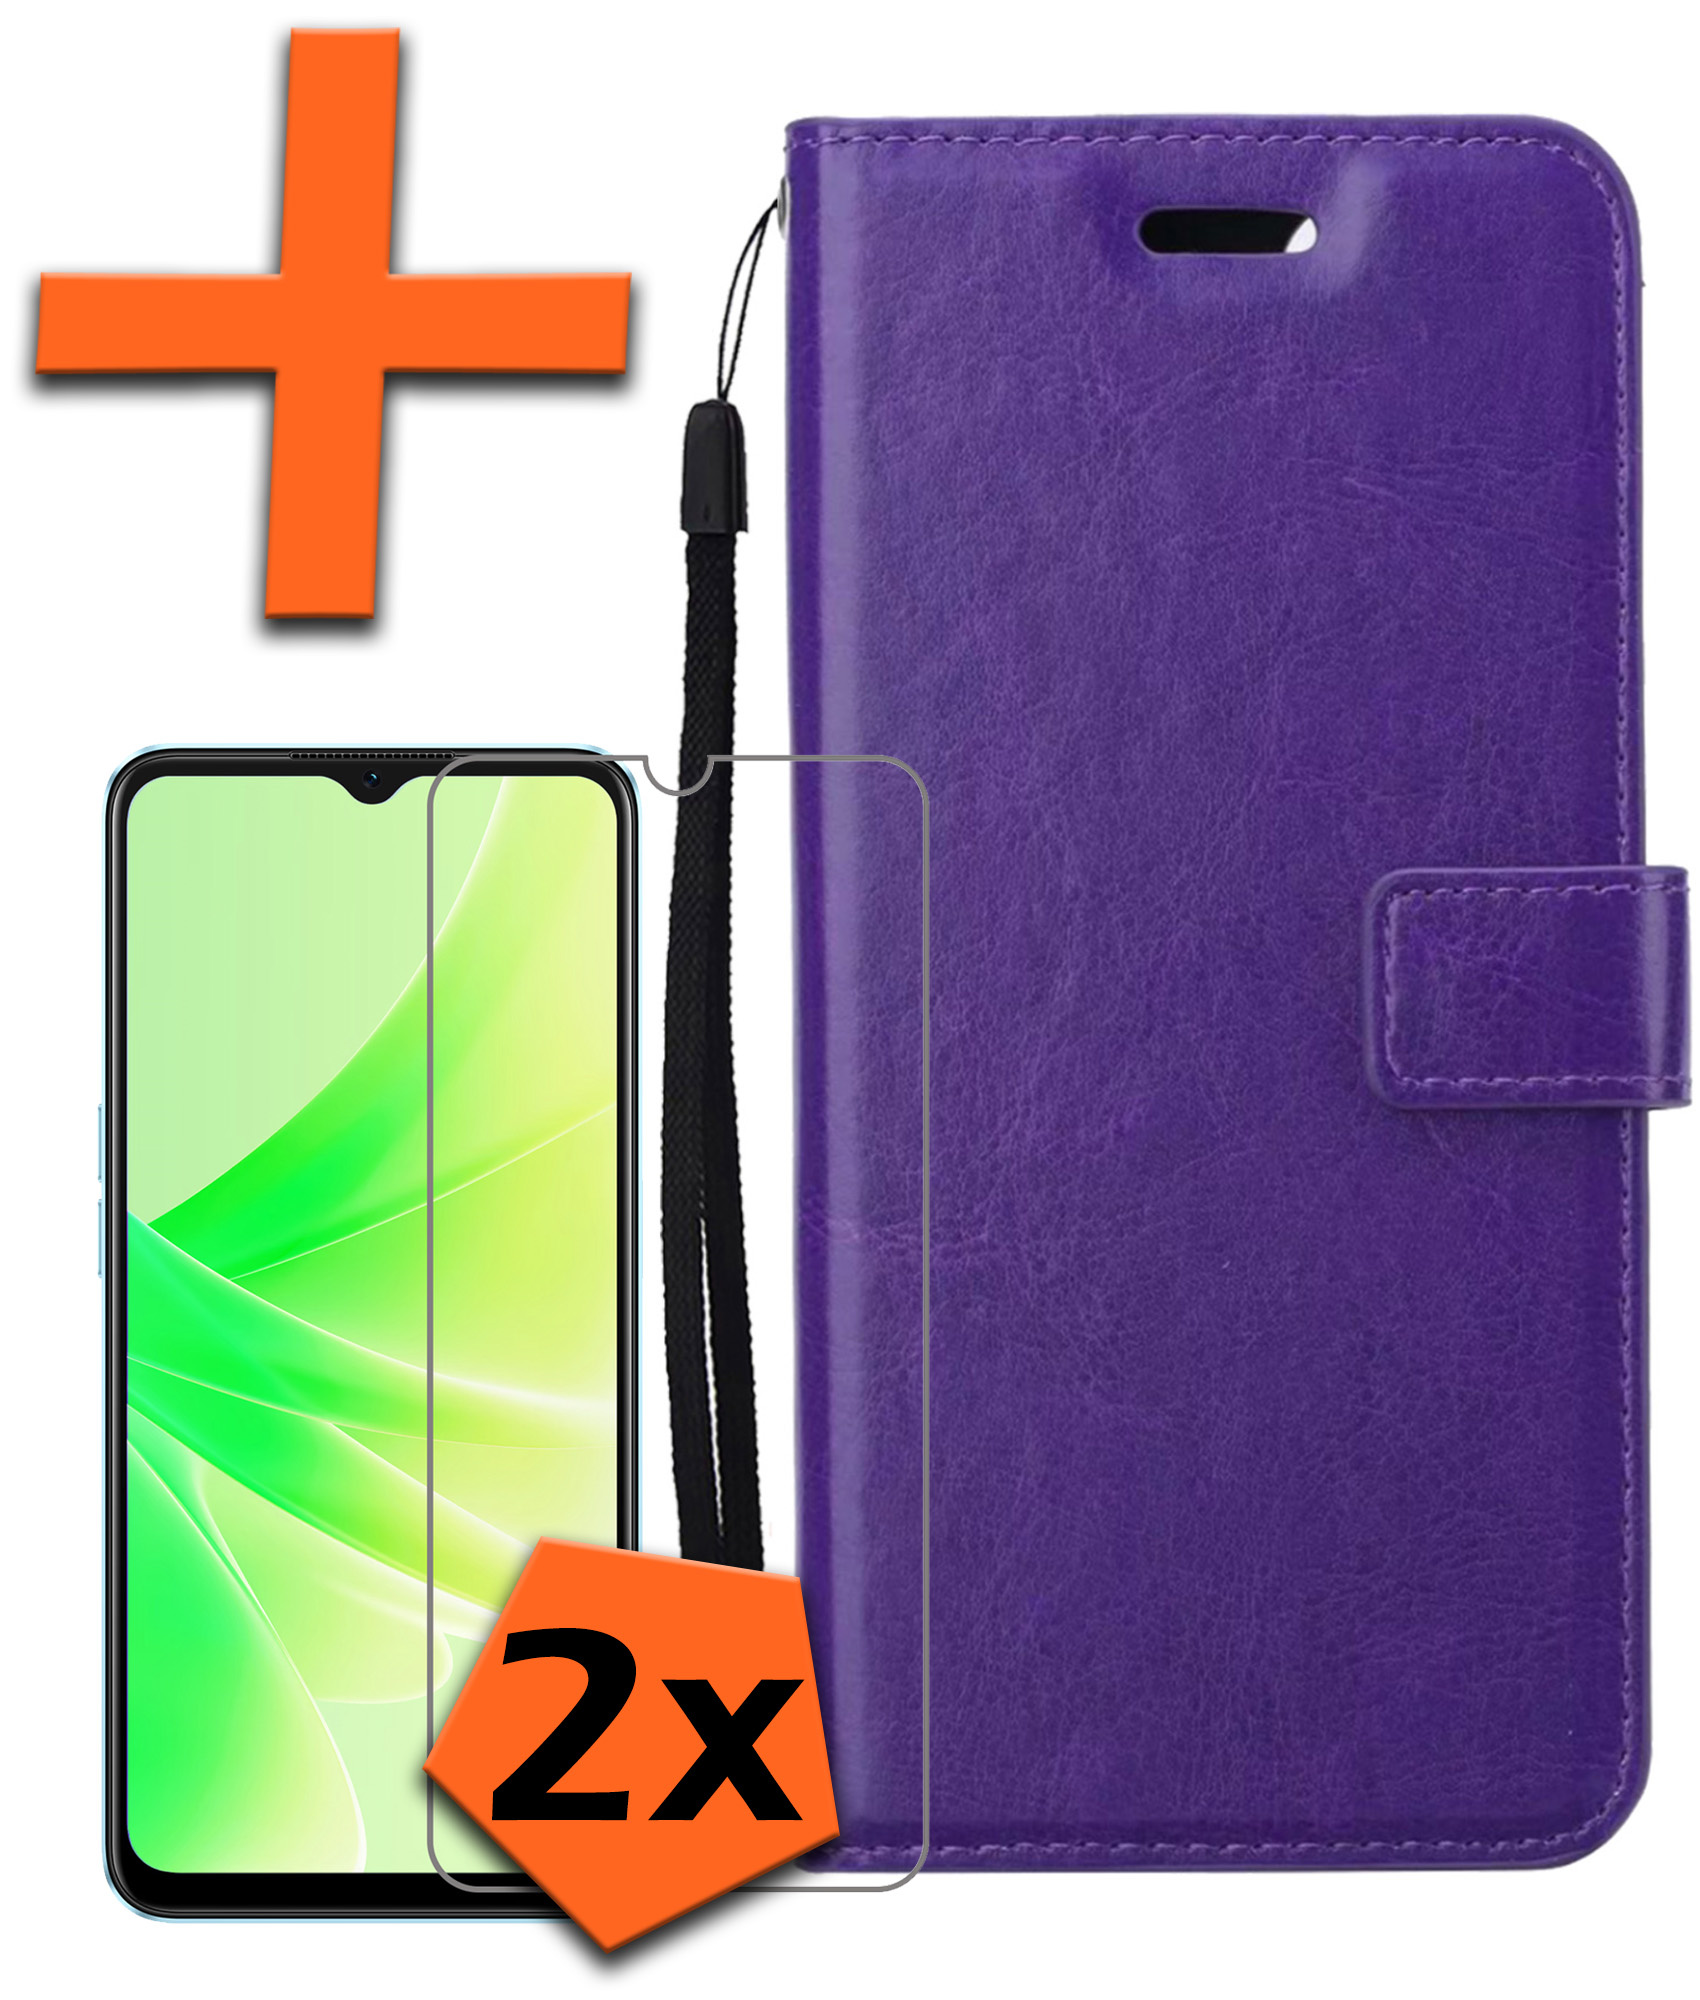 Nomfy OPPO A57s Hoes Bookcase Flipcase Book Cover Met 2x Screenprotector - OPPO A57s Hoesje Book Case - Paars